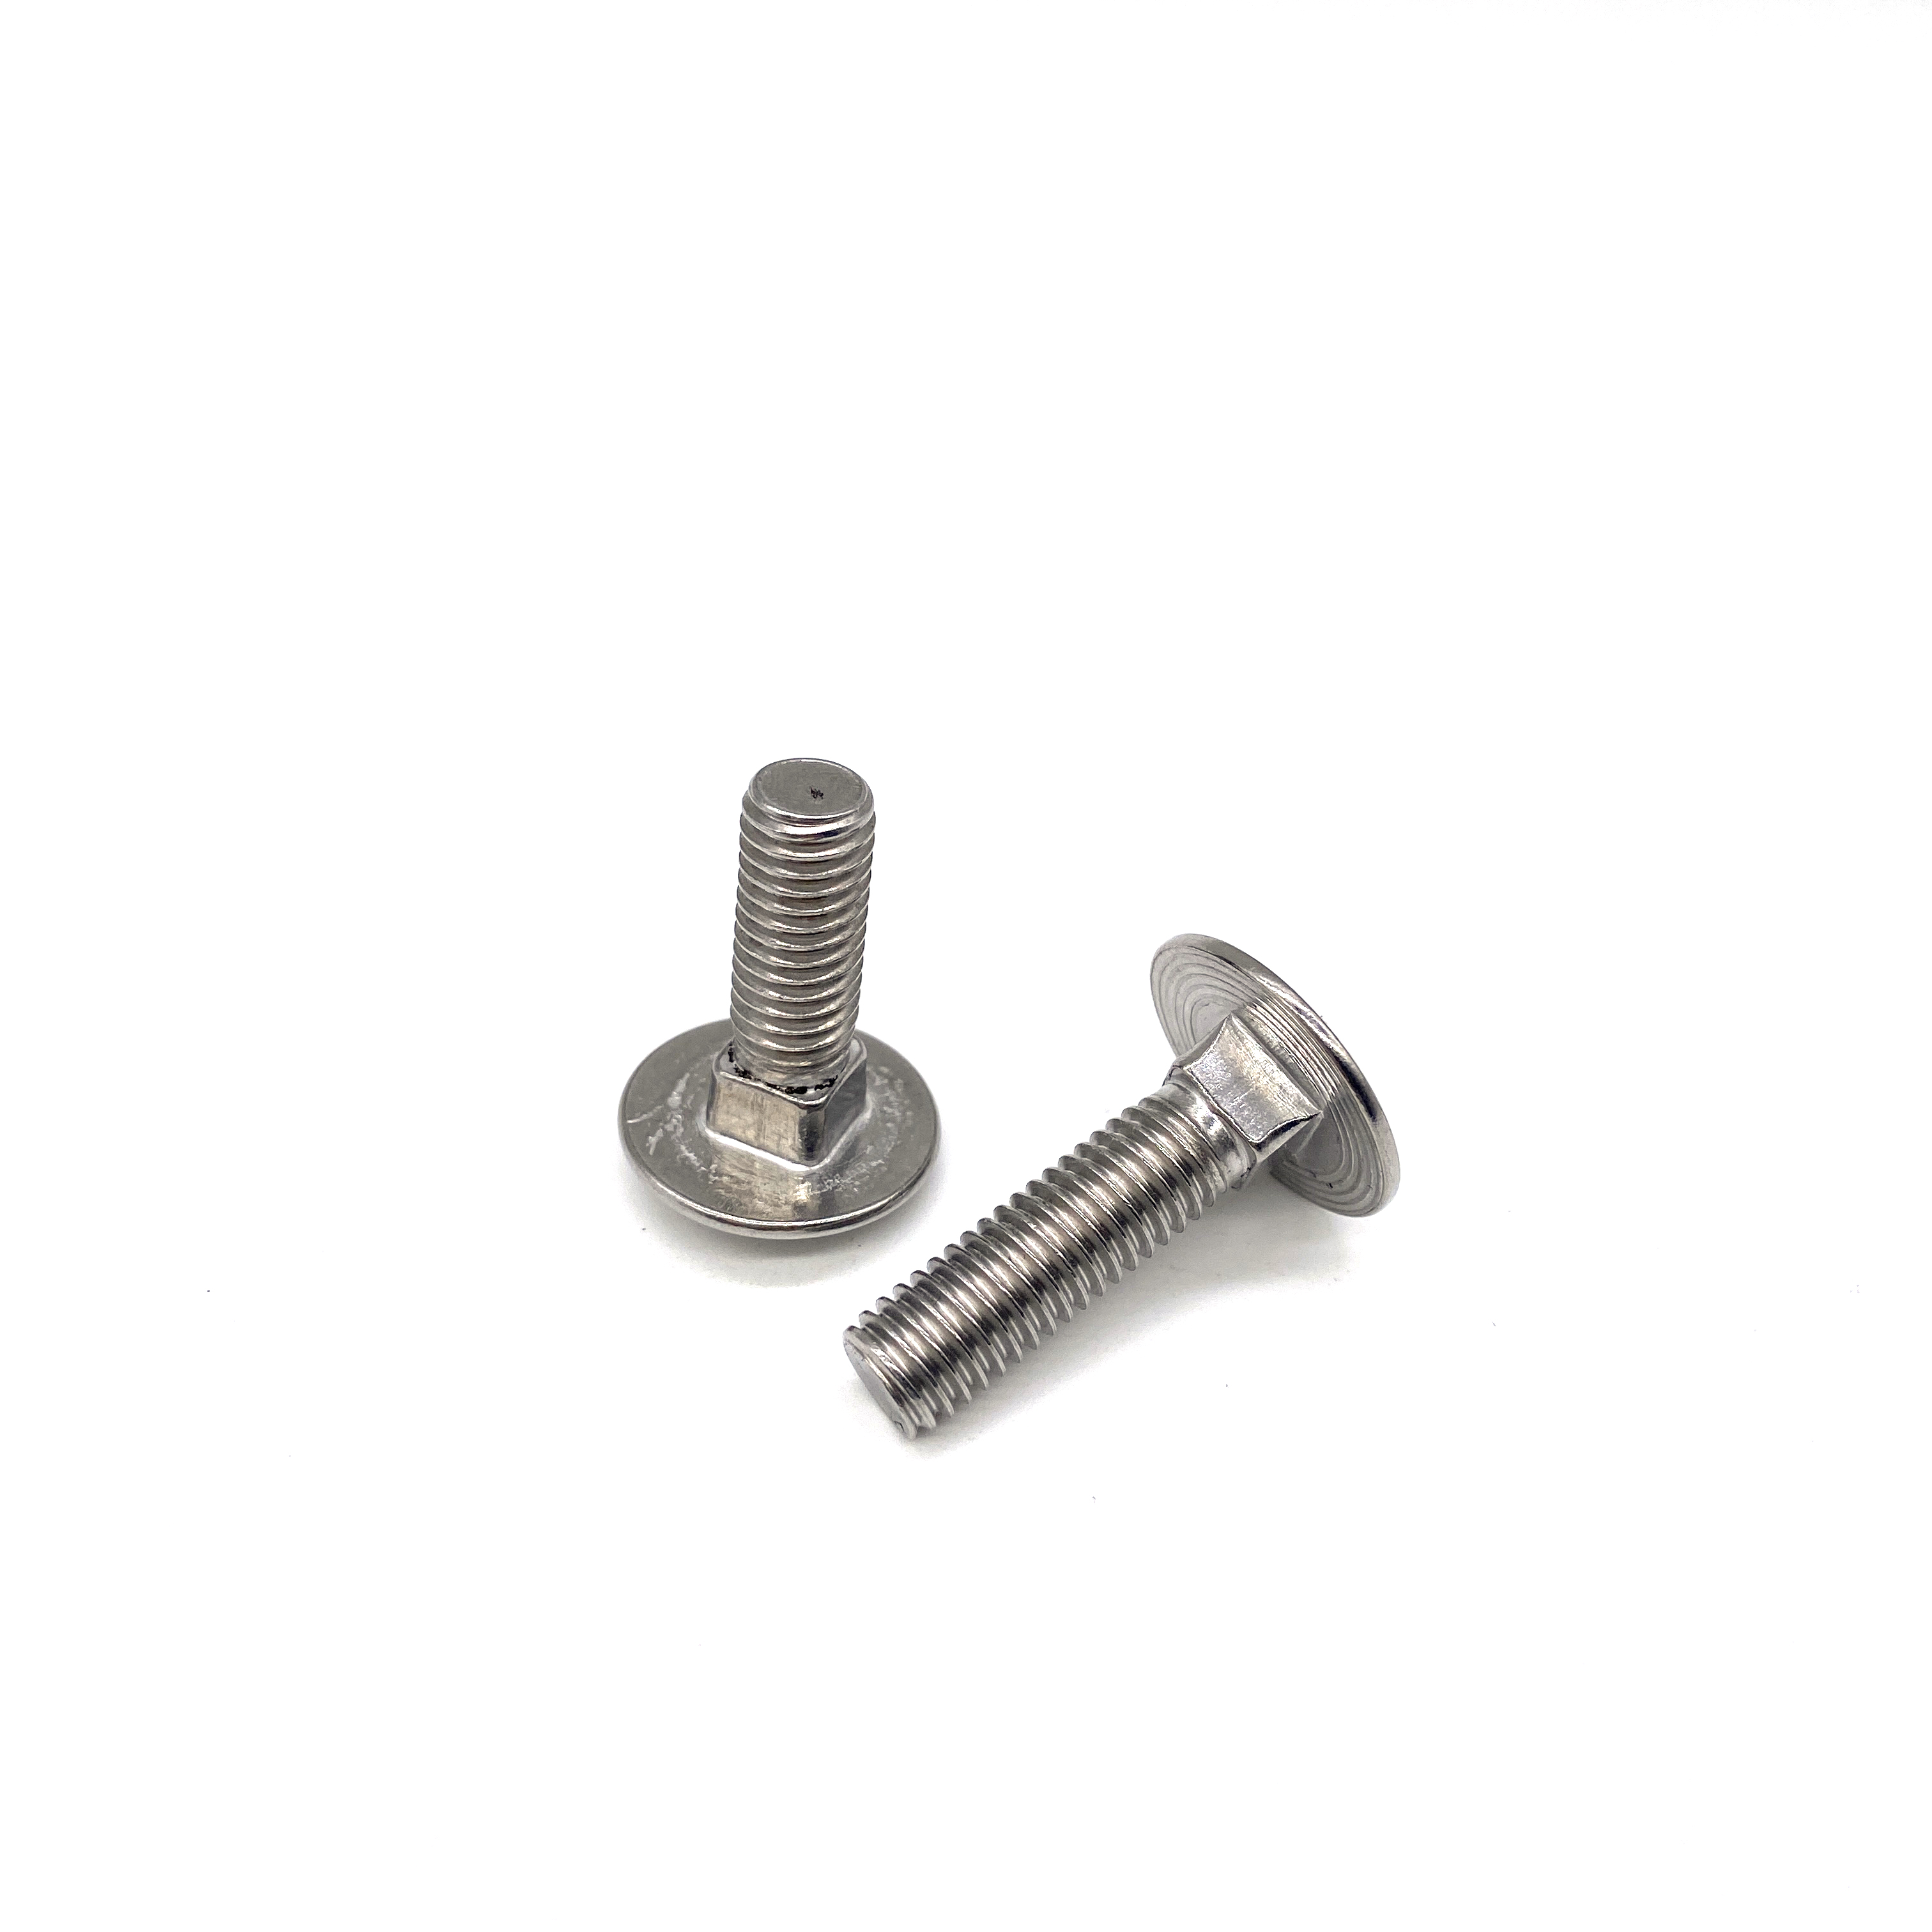 M5 M6 DIN603 INOX A4 INOX A2 Stainless Steel 314 316 Square Neck Carriage Bolt 